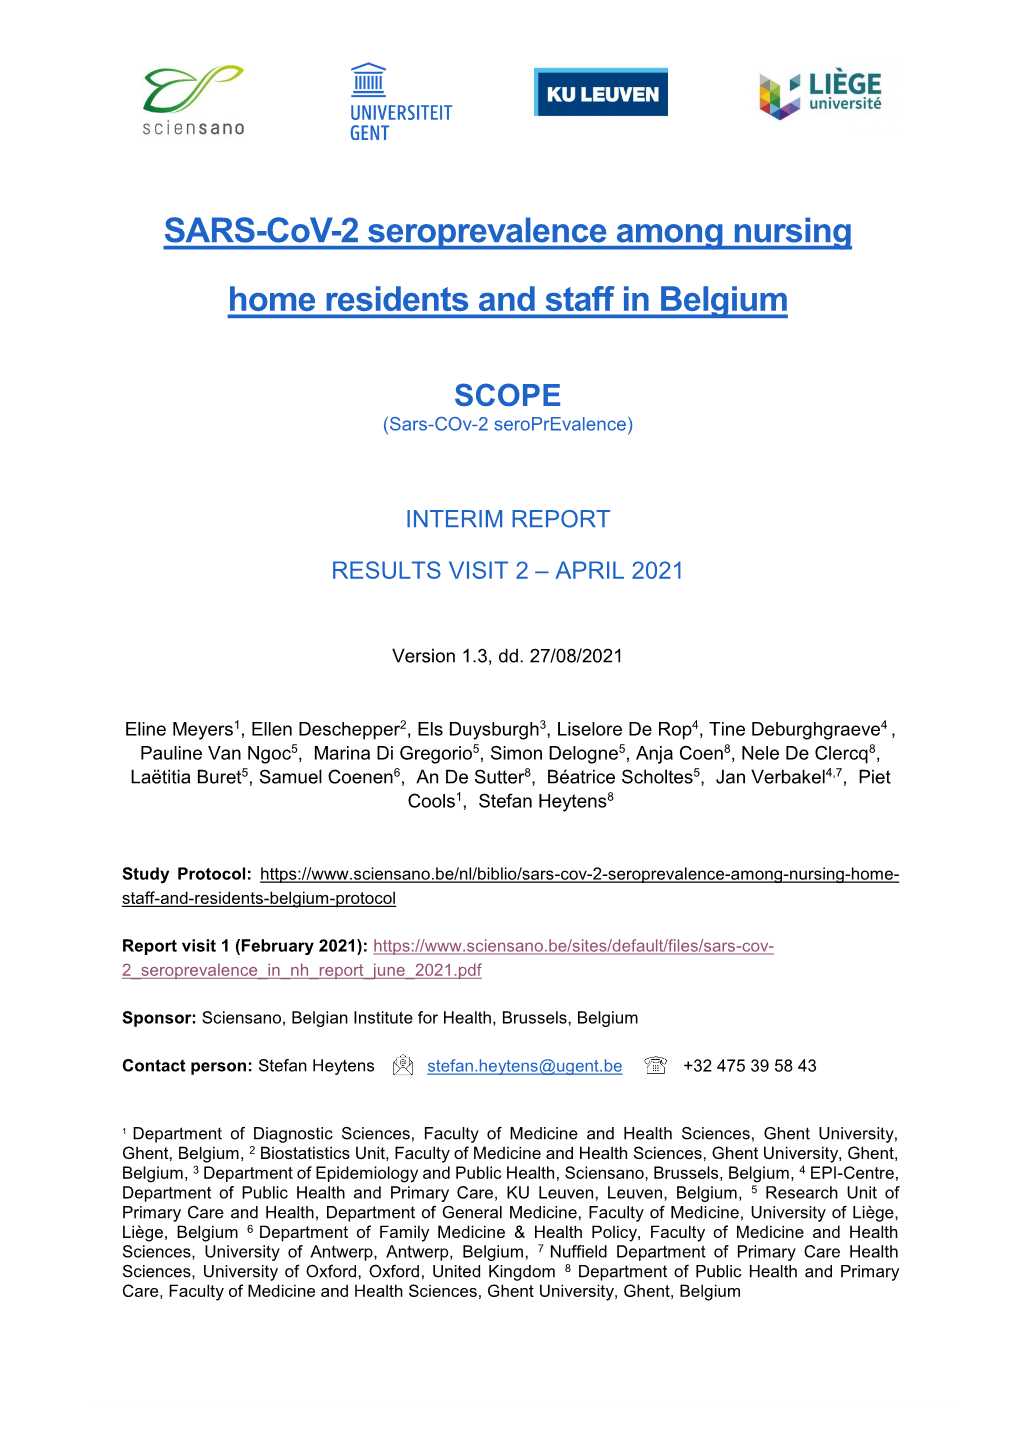 SARS-Cov-2 Seroprevalence Among Nursing Home Residents and Staff in Belgium